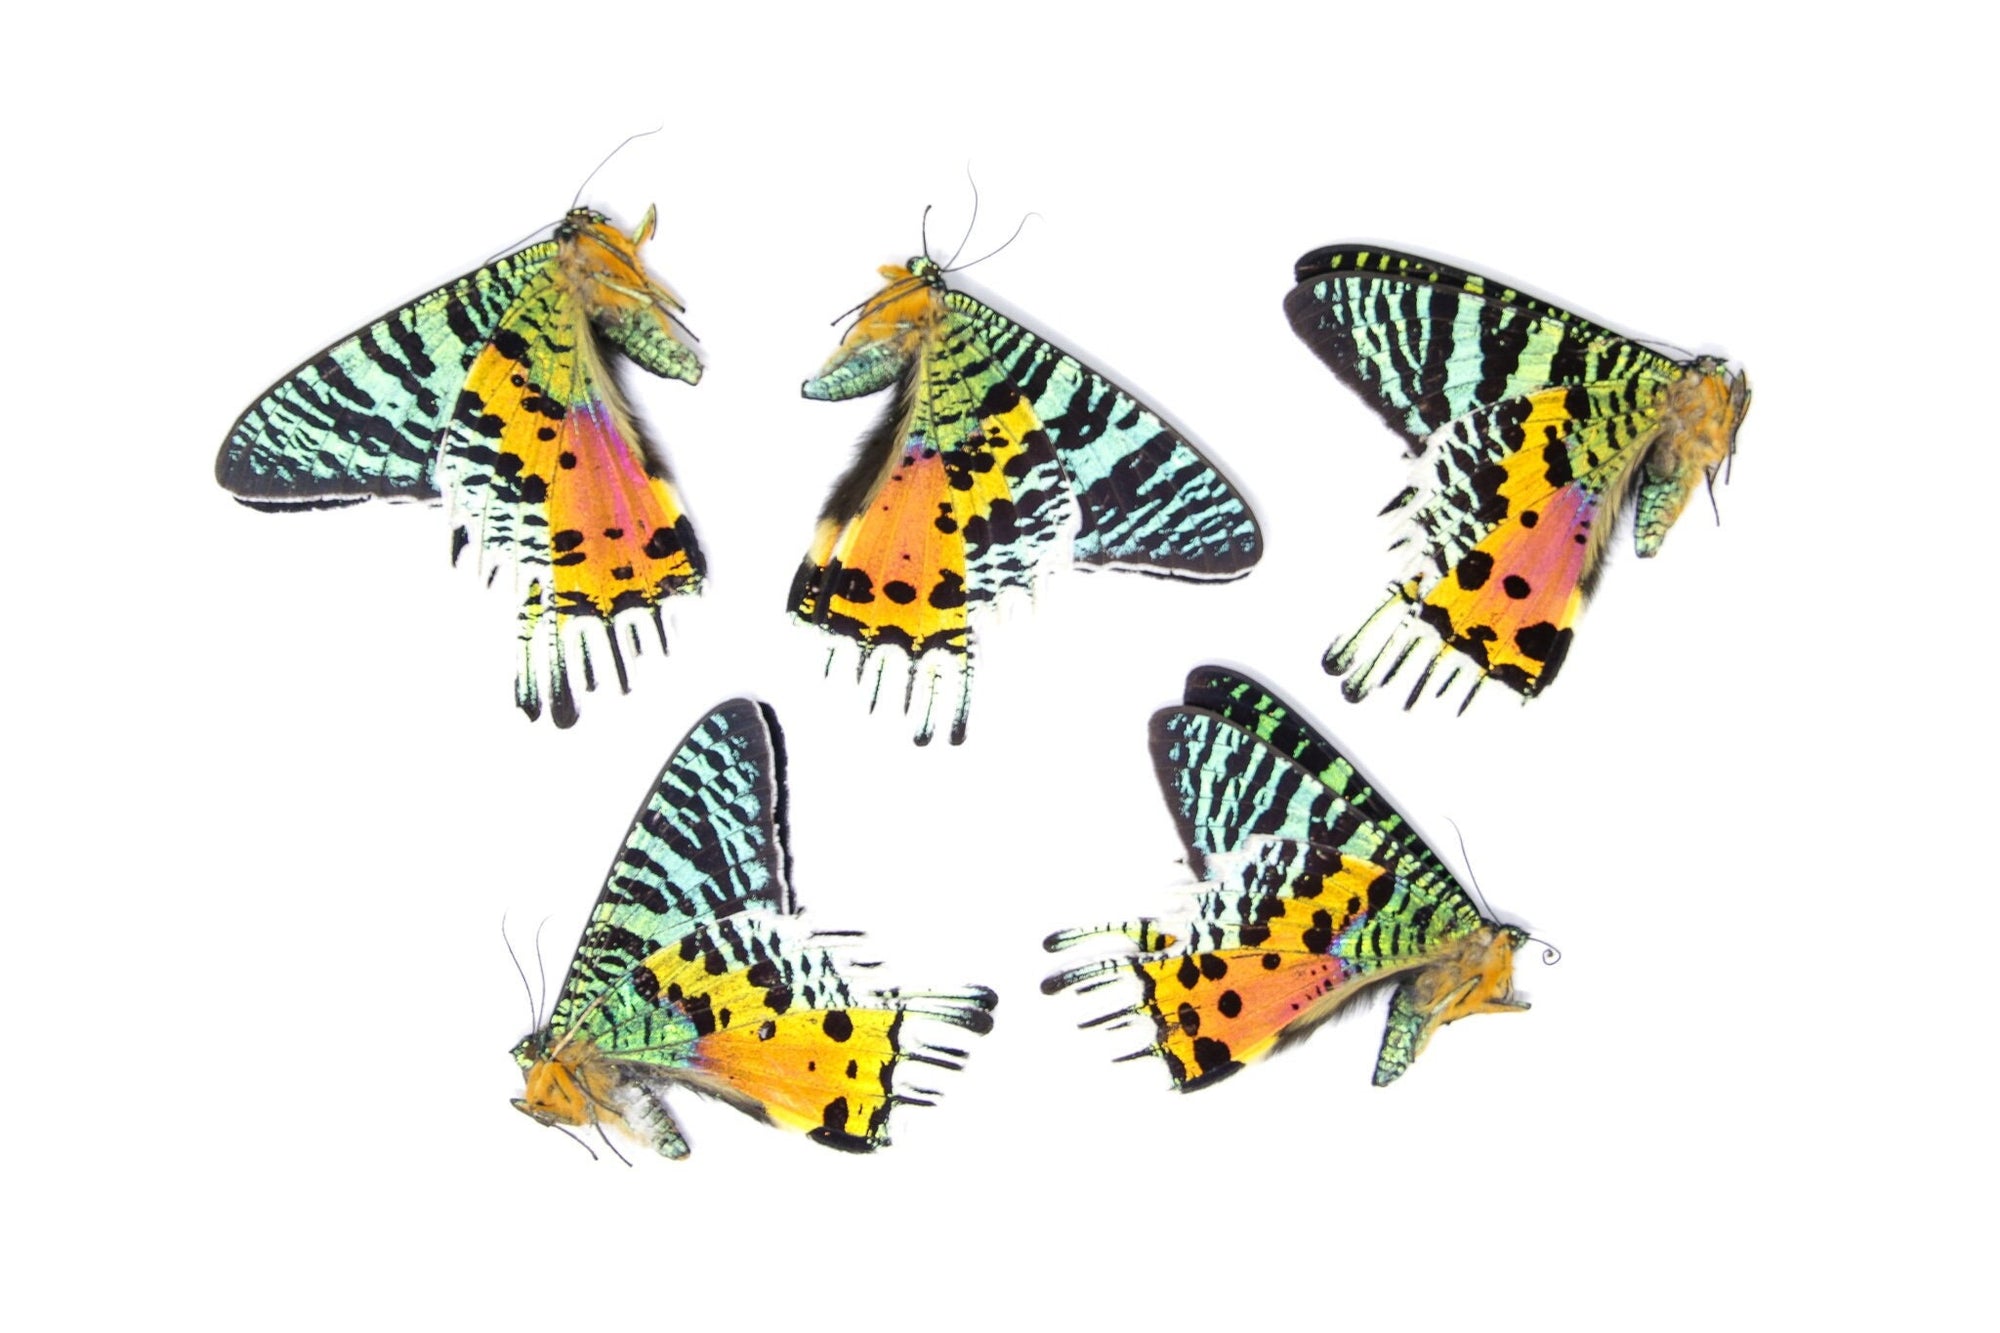 25 x Madagascan Sunset Moths A1 | Chrysiridia rhipheus | Colorful Day-Flying Moths Unmounted Specimens for Entomology